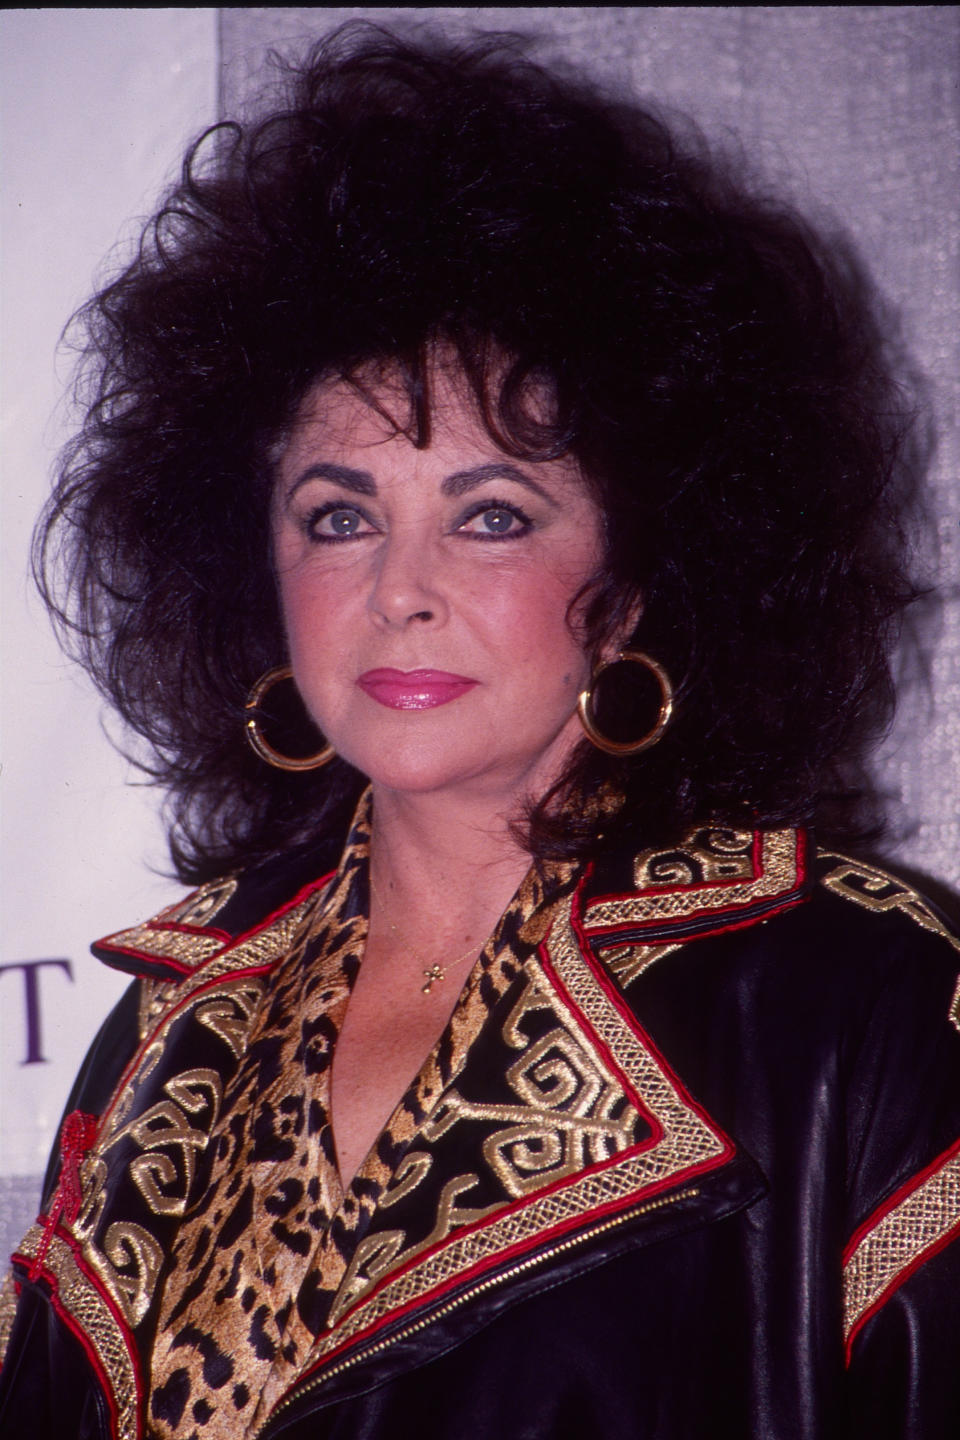 Close-up of Liz wearing a brocade outfit and with big hair